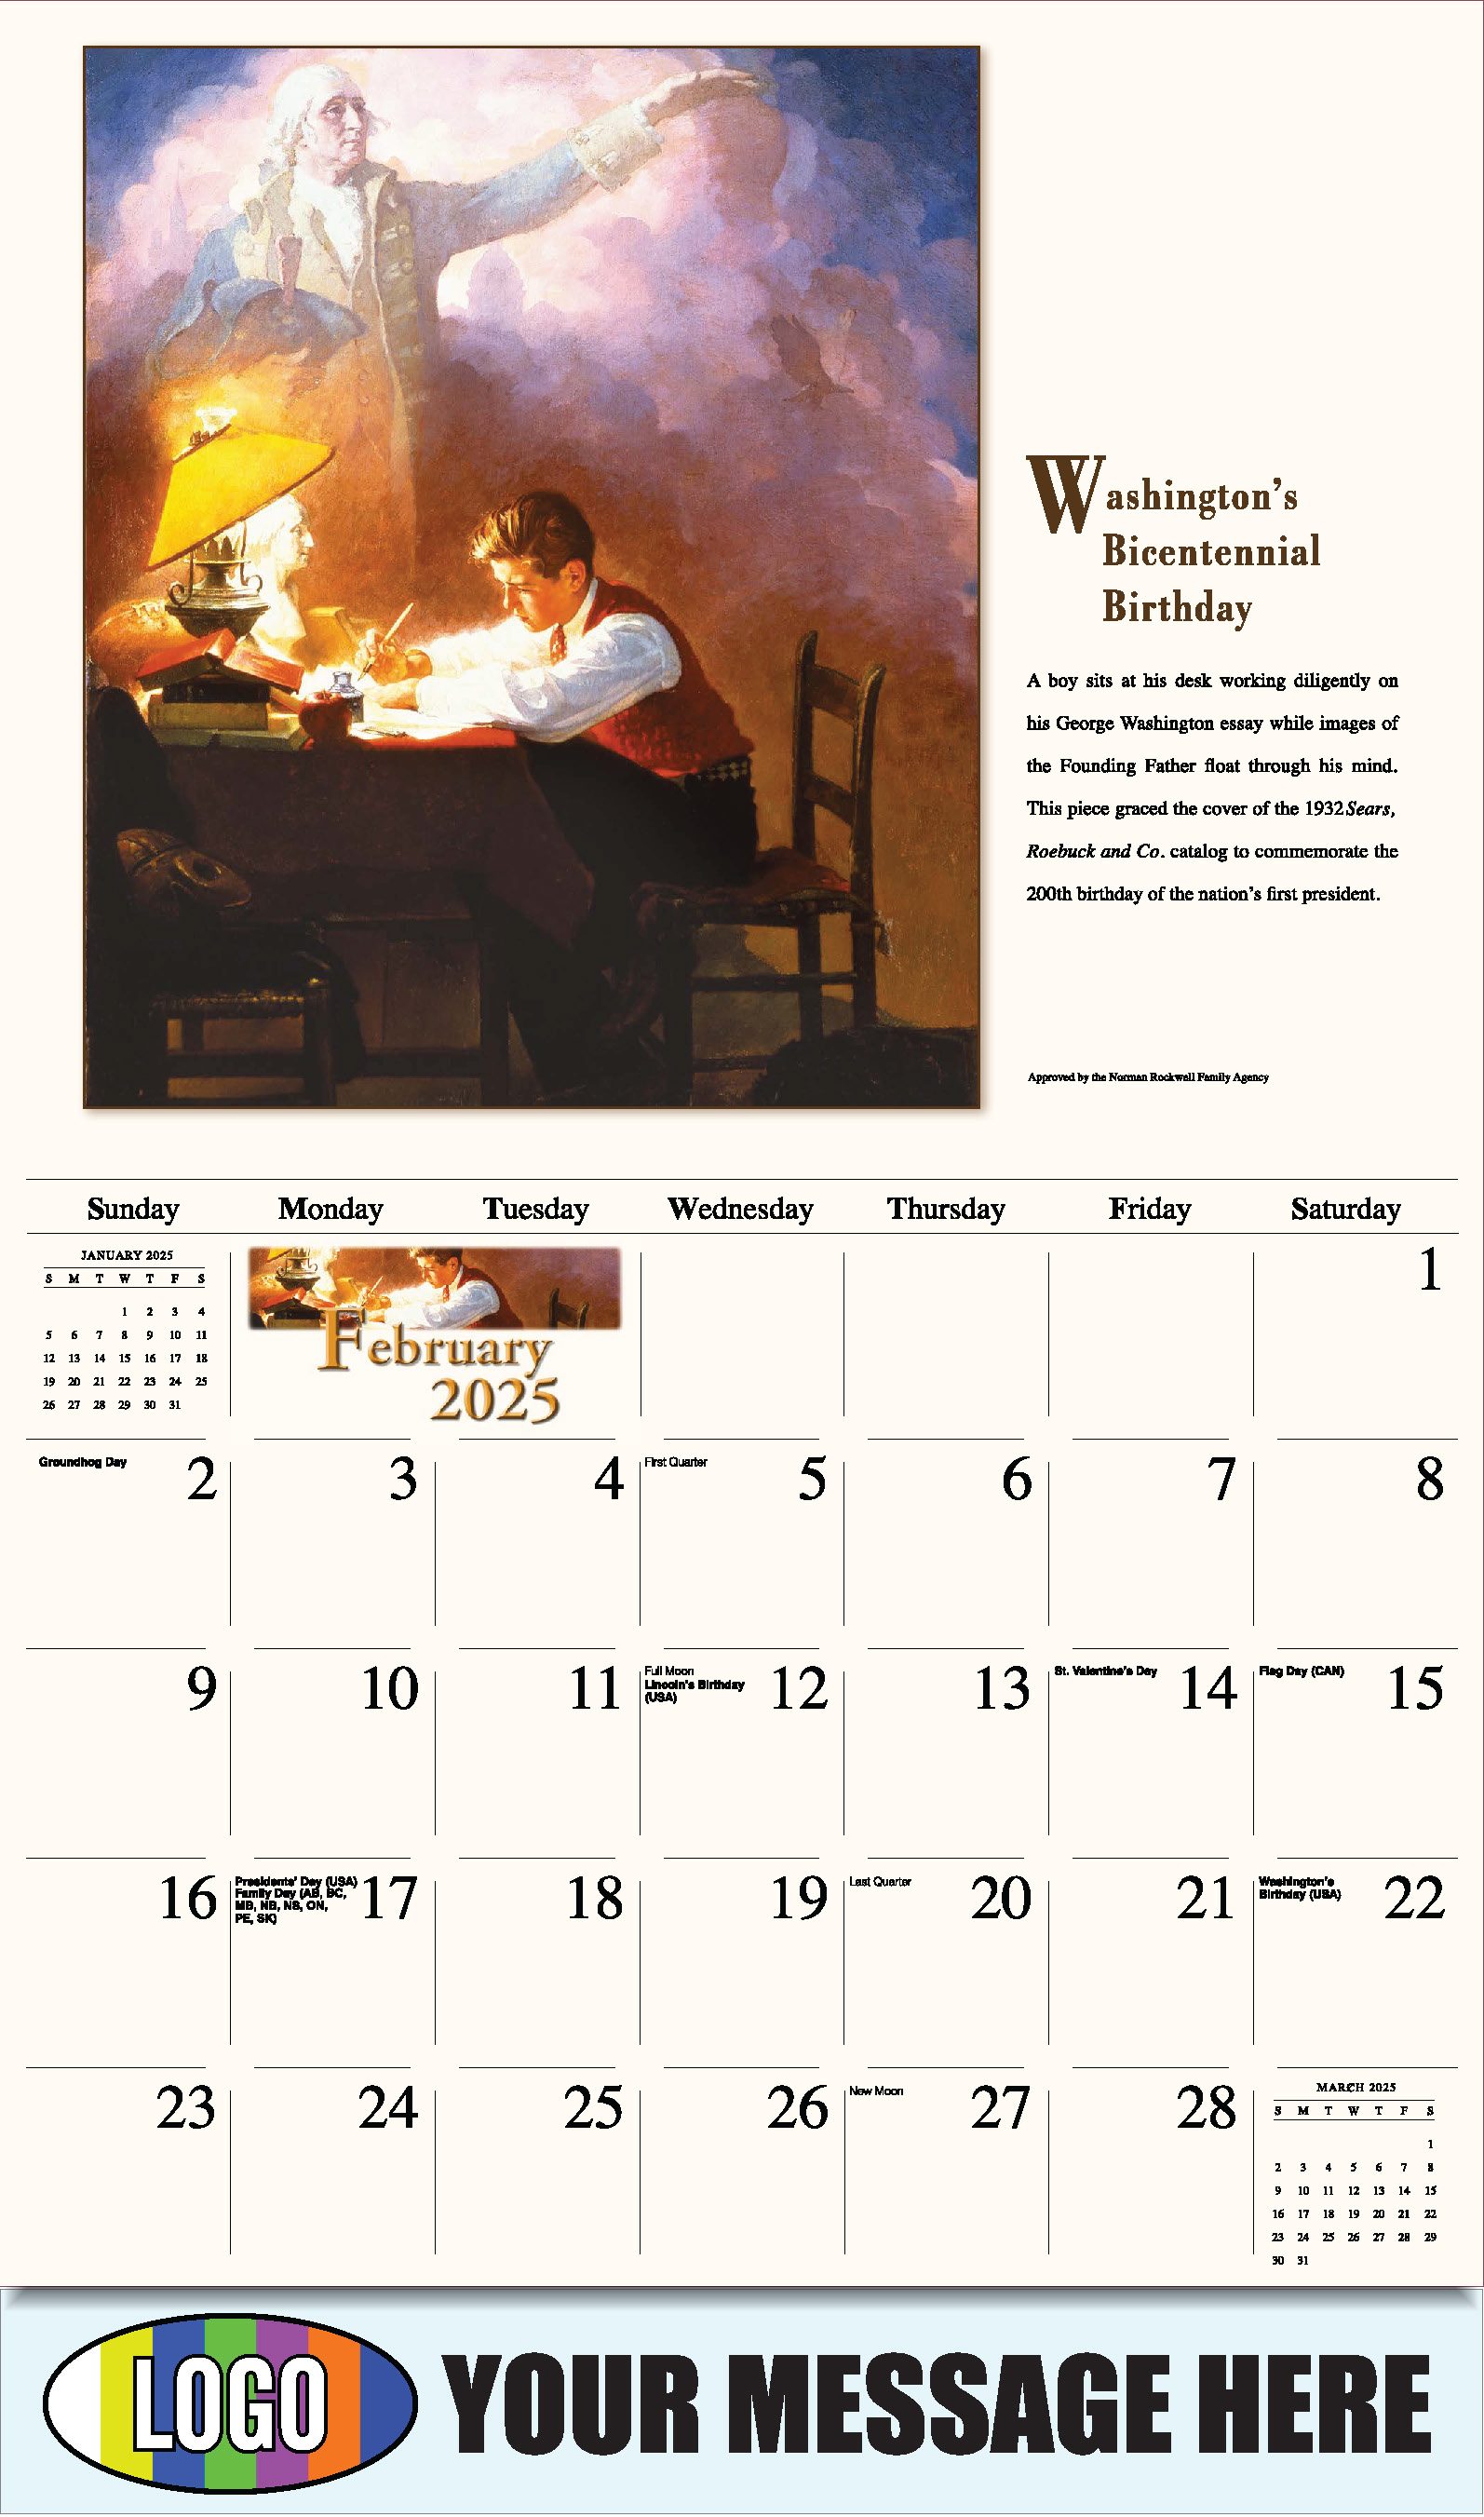 Memorable Images by Norman Rockwell 2025 Business Promotional Wall Calendar - February